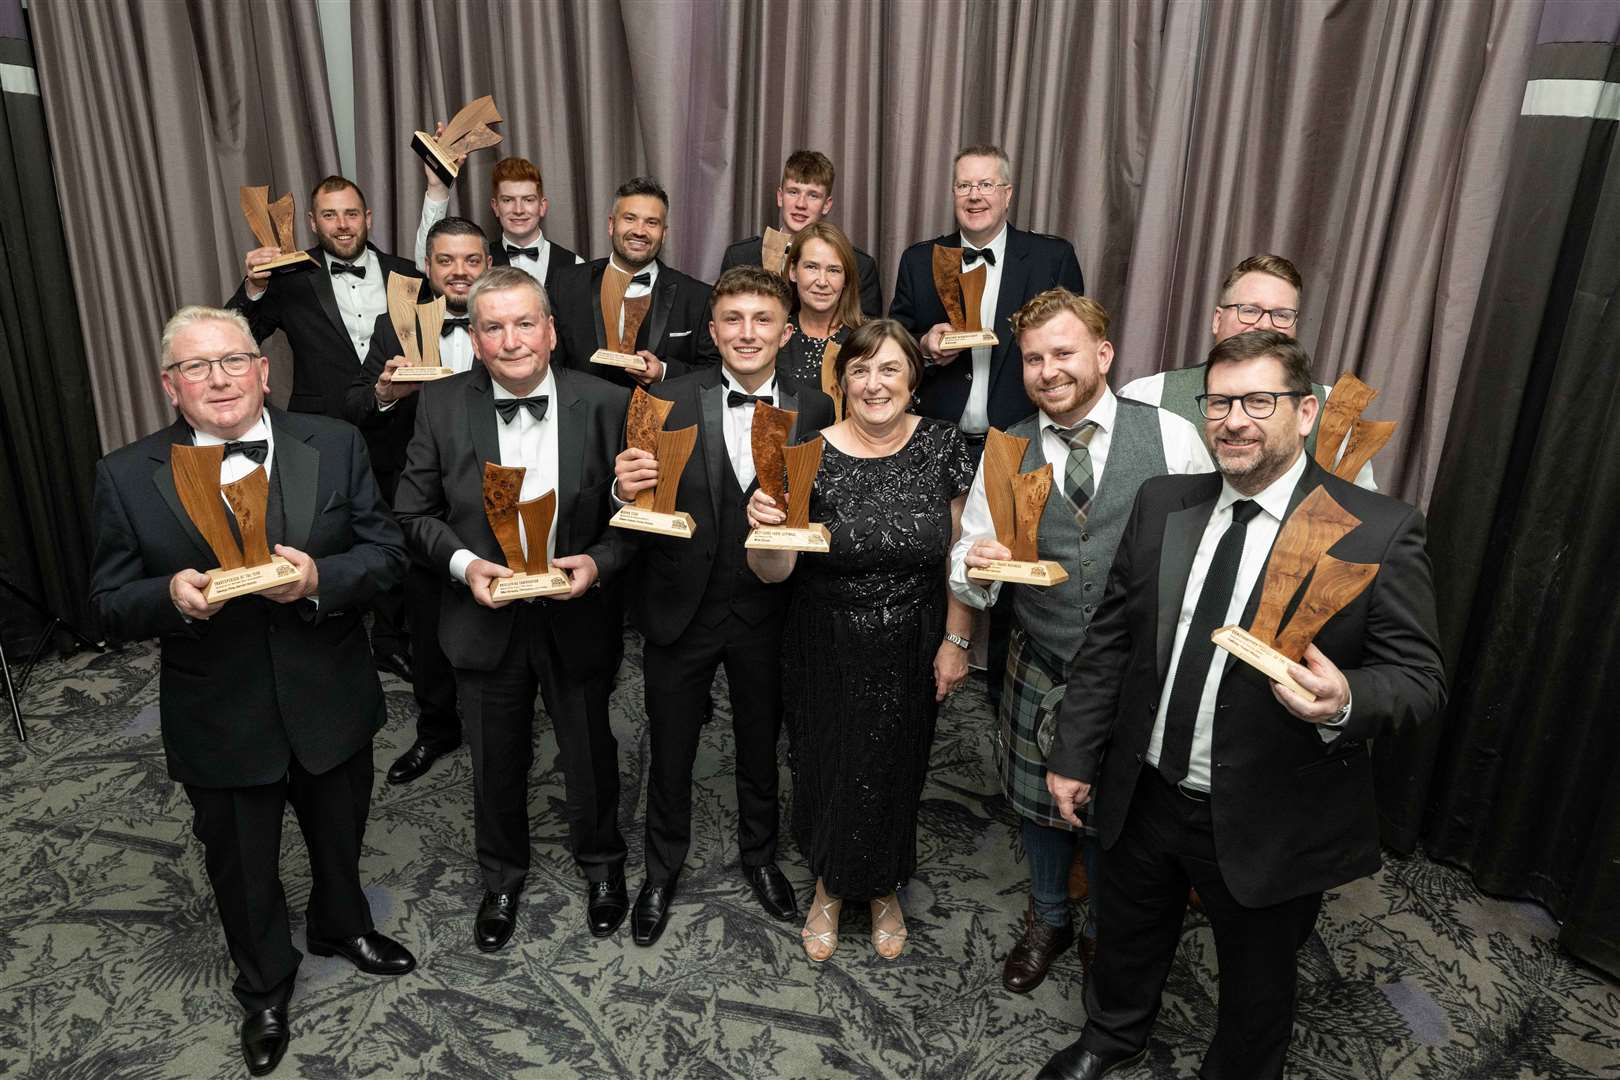 Winners at this year's Trades Awards in Aberdeen.